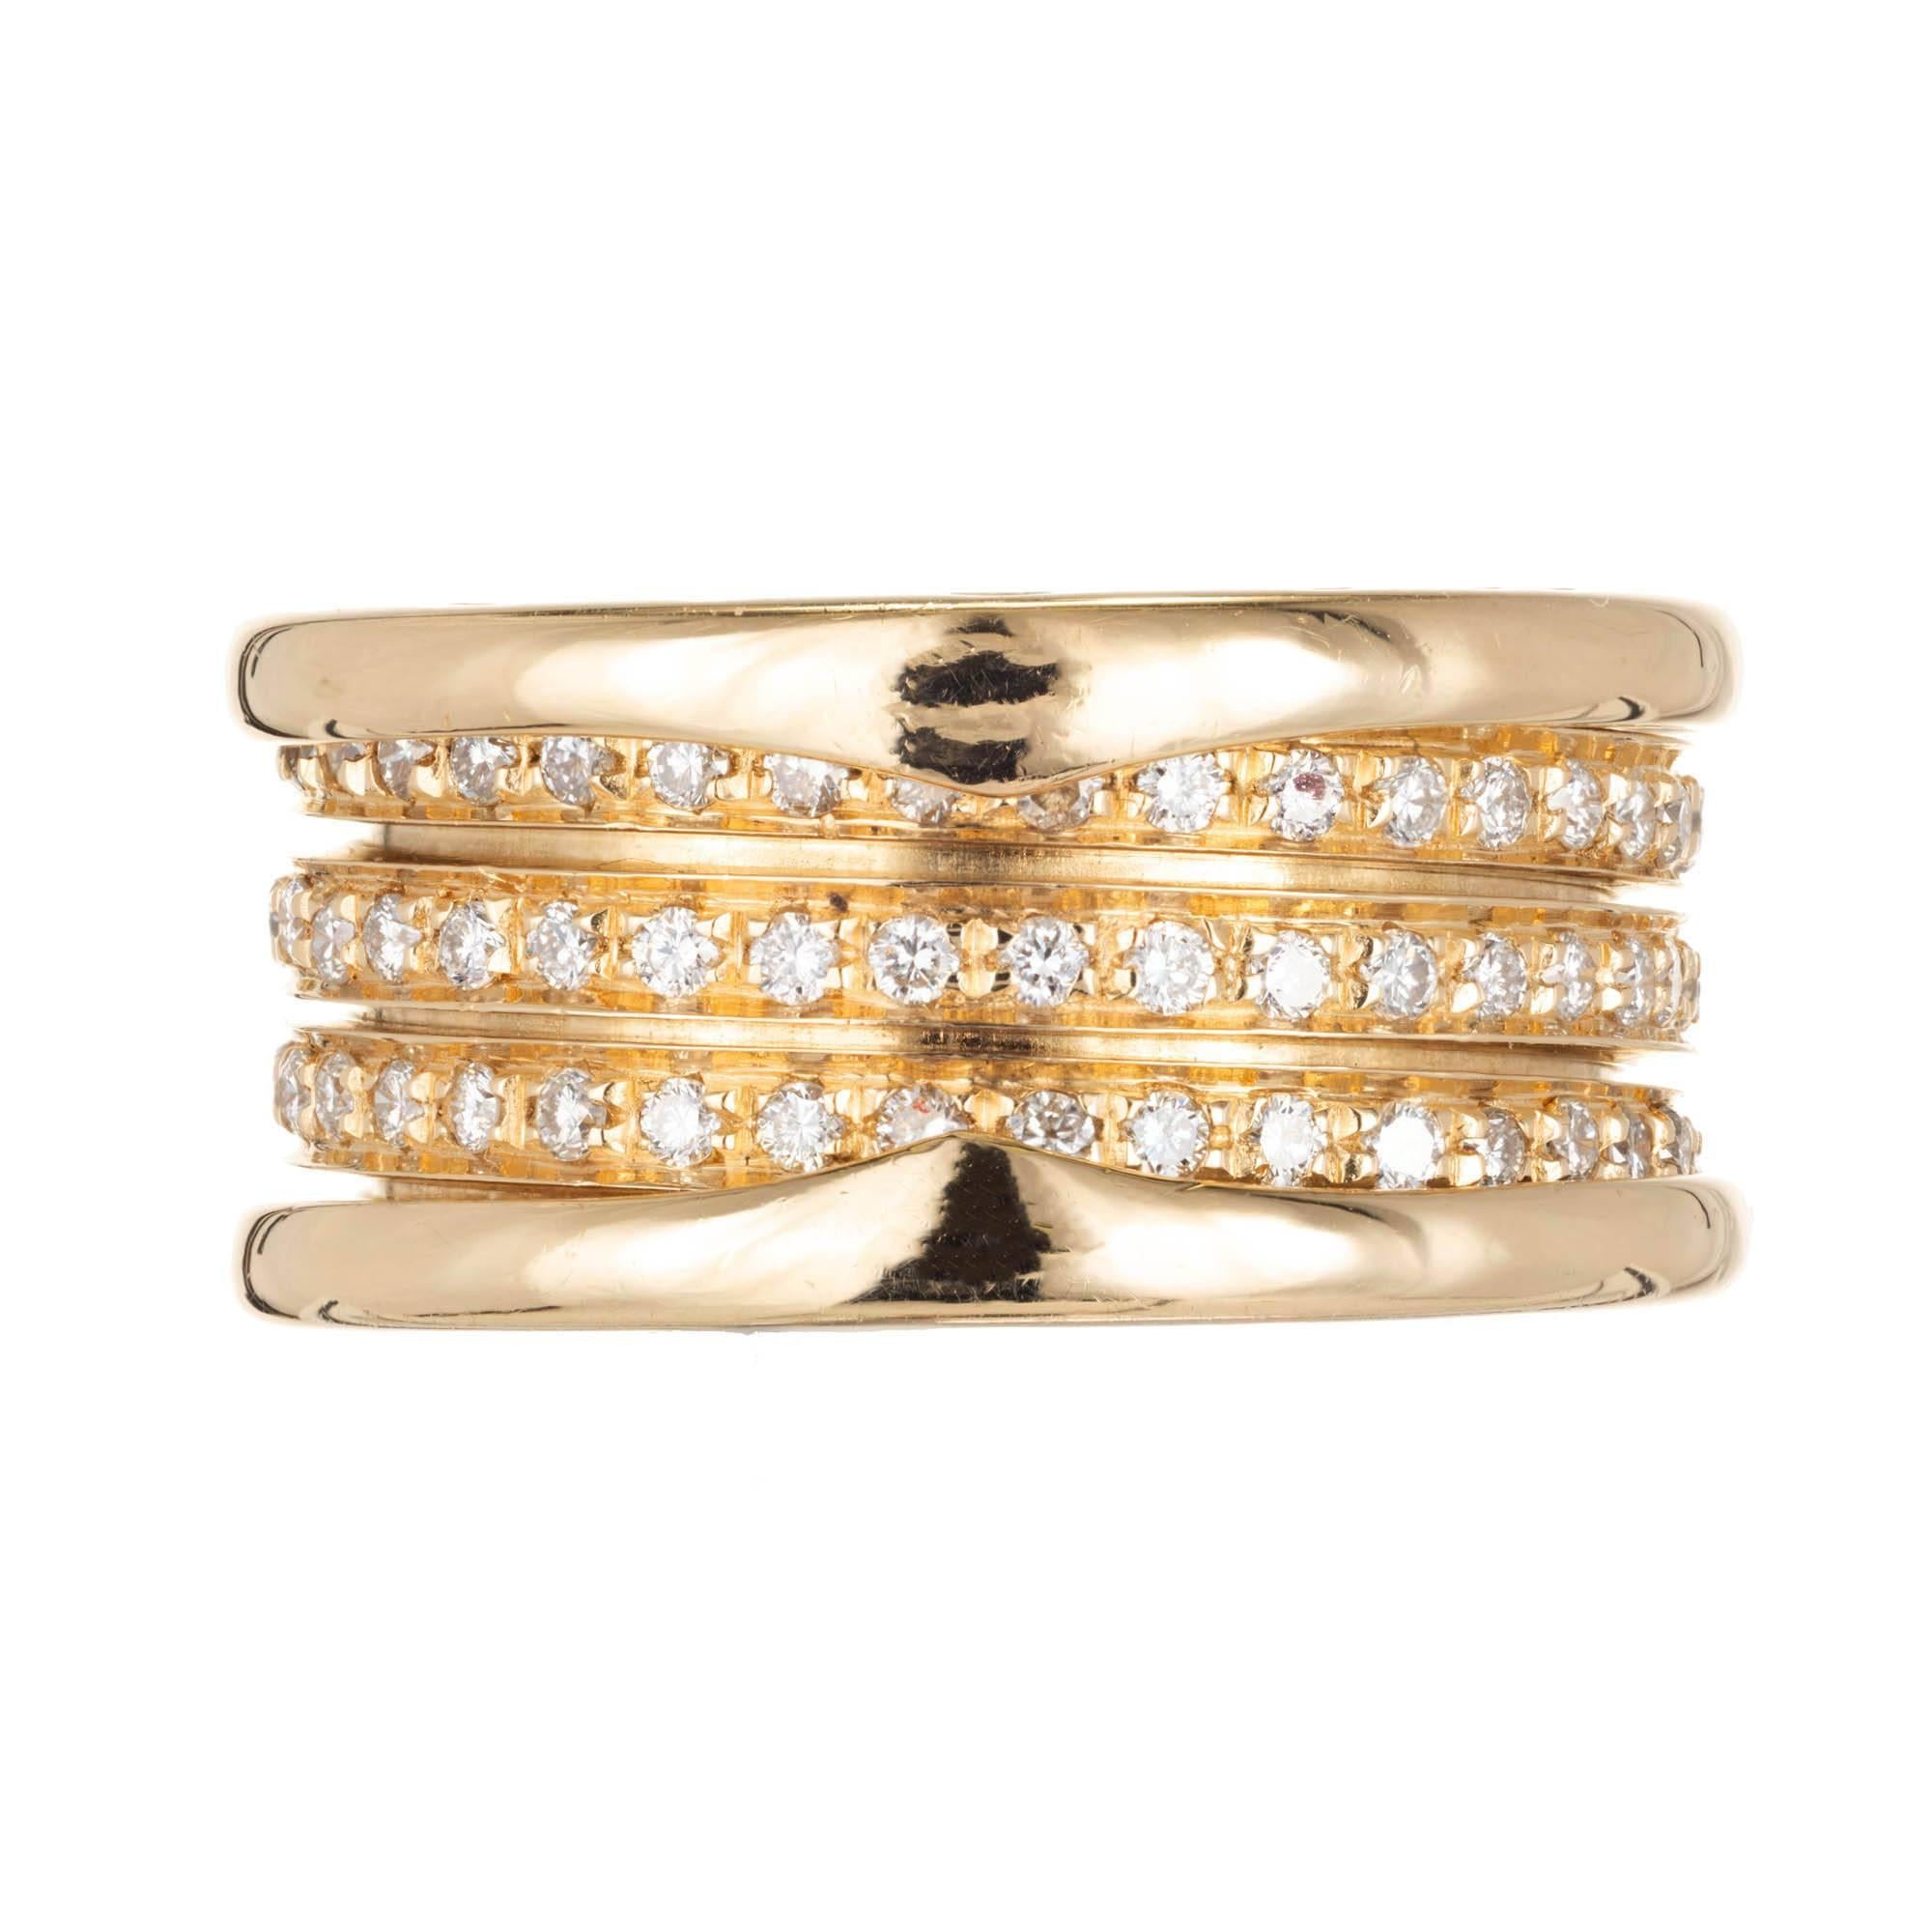 Bvlgari Three band diamond band ring. 18k yellow gold setting with pave diamonds on the spiral.

100 round brilliant cut G VS diamonds Approximate 1.00 carat
Size 6 and not sizable
18k yellow gold
Stamped: 750
Hallmark: Bvlgari made in Italy
12.8